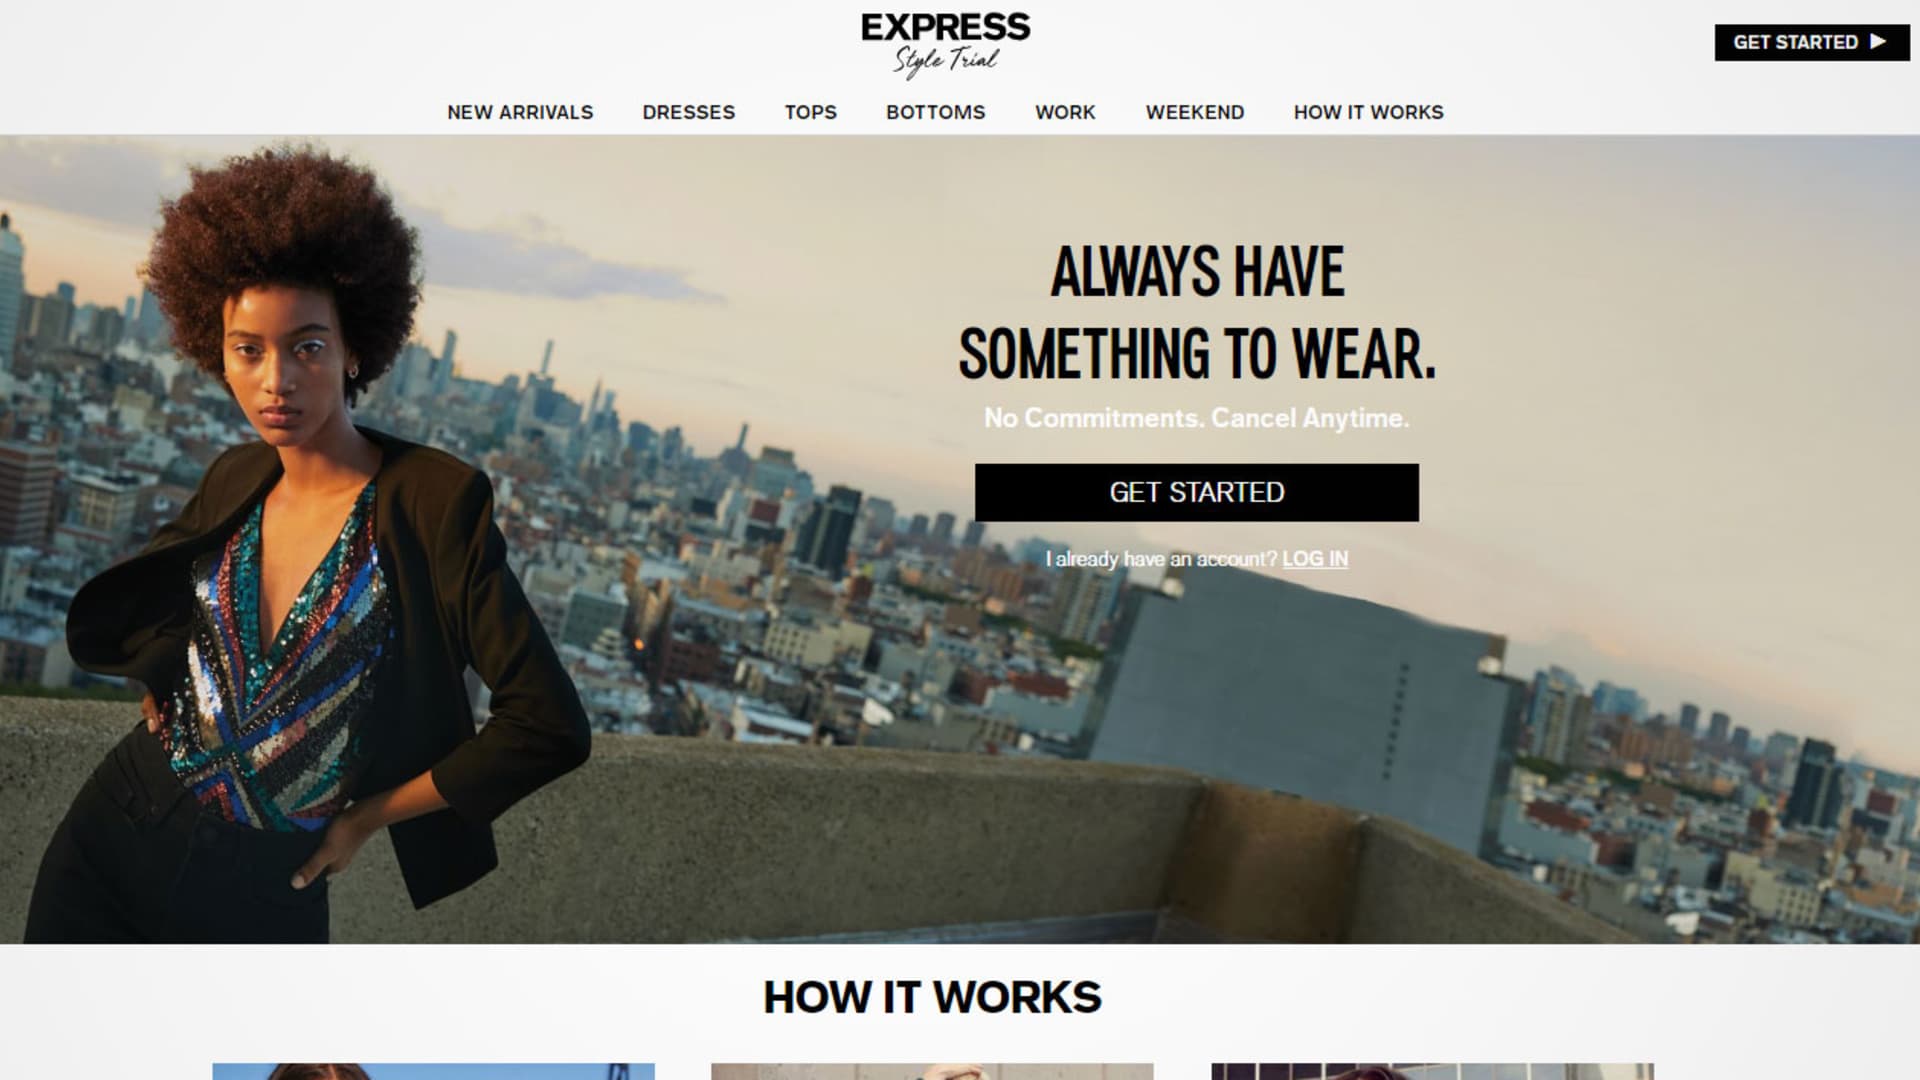 Express is the latest retailer to launch a clothing rental service